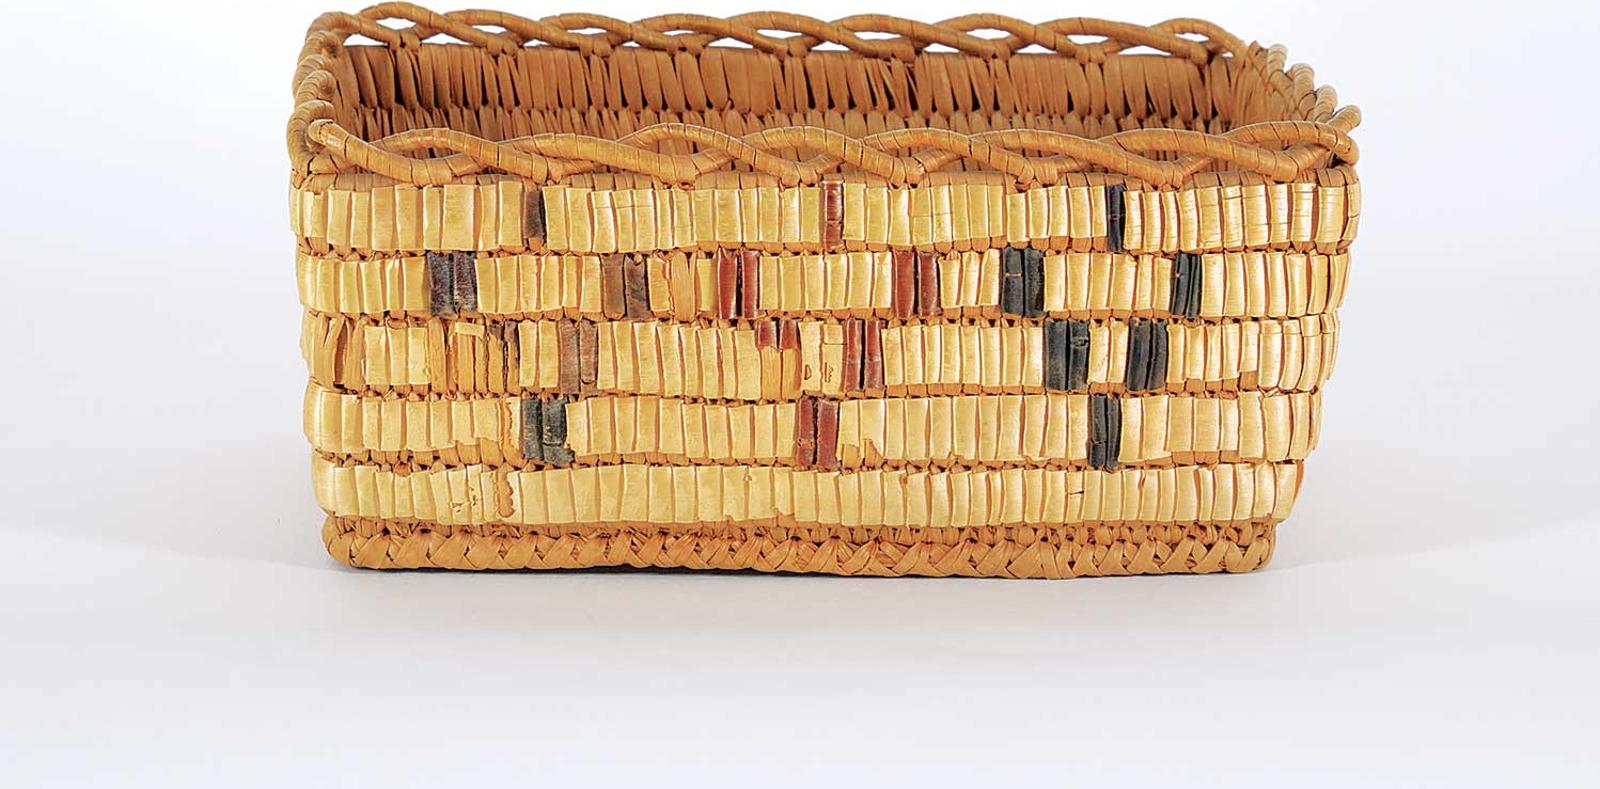 Northwest Coast First Nations School - Small Rectangular Basket with Red and Black Design